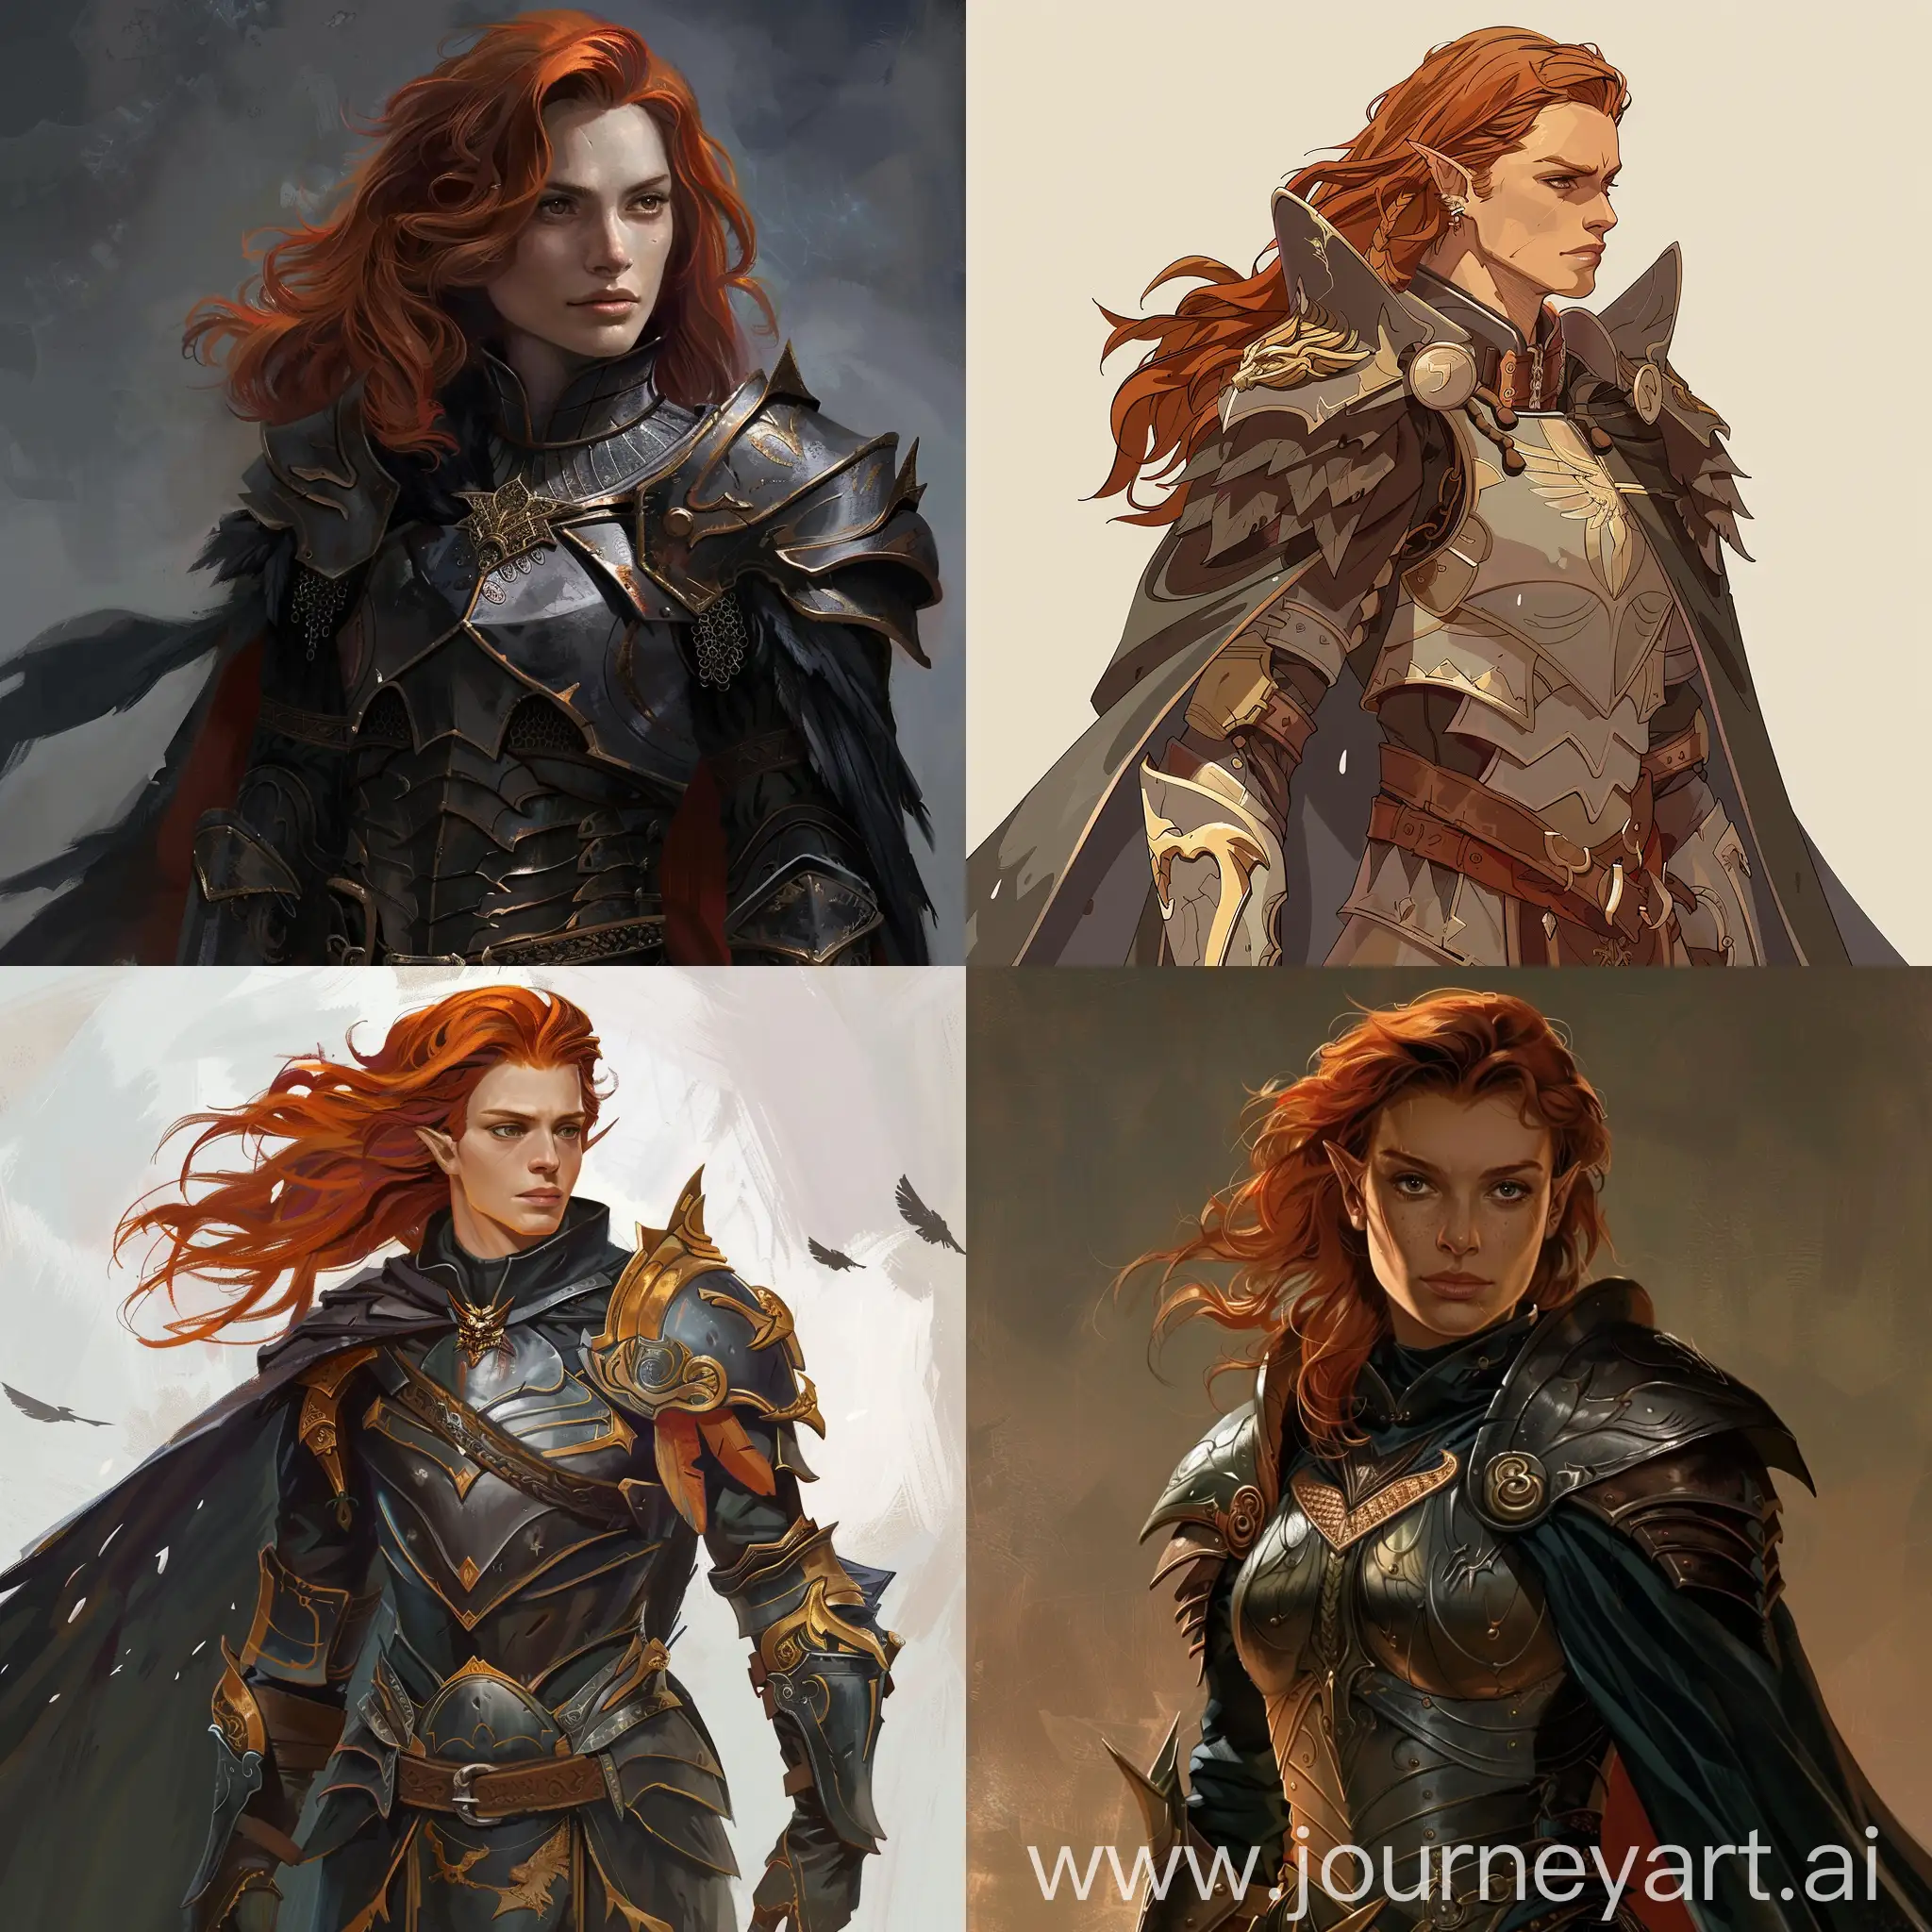 AuburnHaired-Warrior-Leader-of-the-Raven-Guild-in-Armor-and-Cape